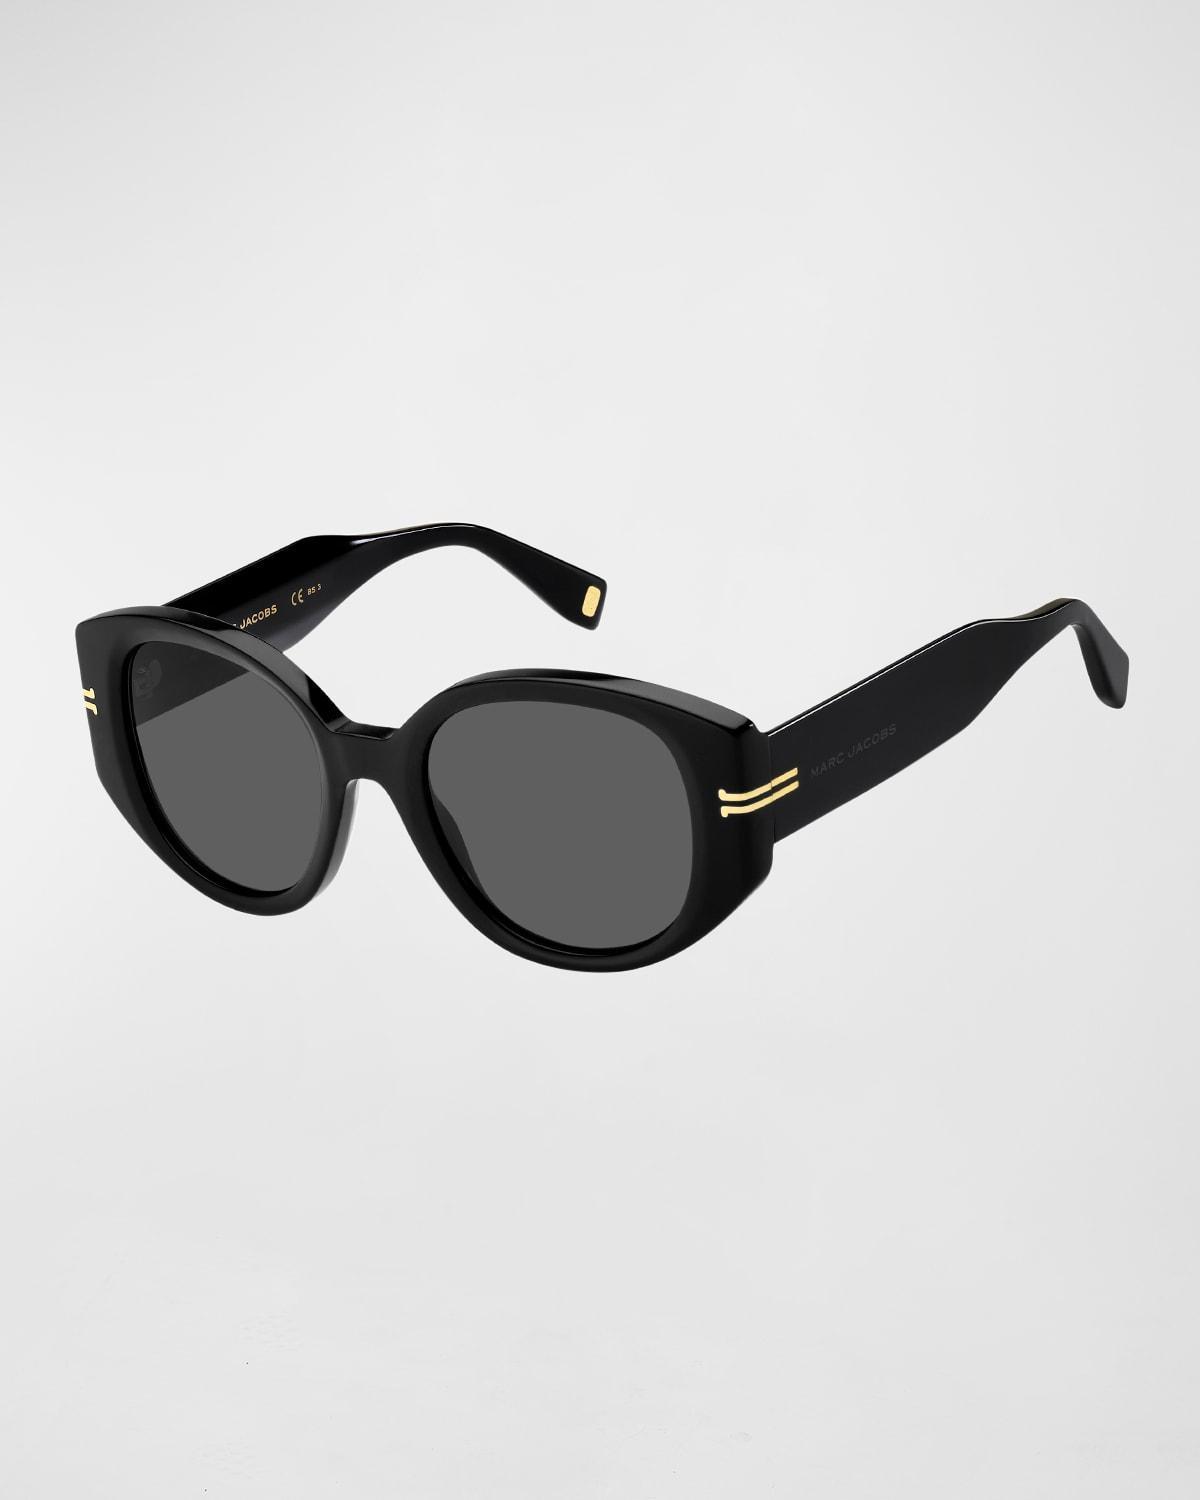 Marc Jacobs Round Sunglasses Product Image